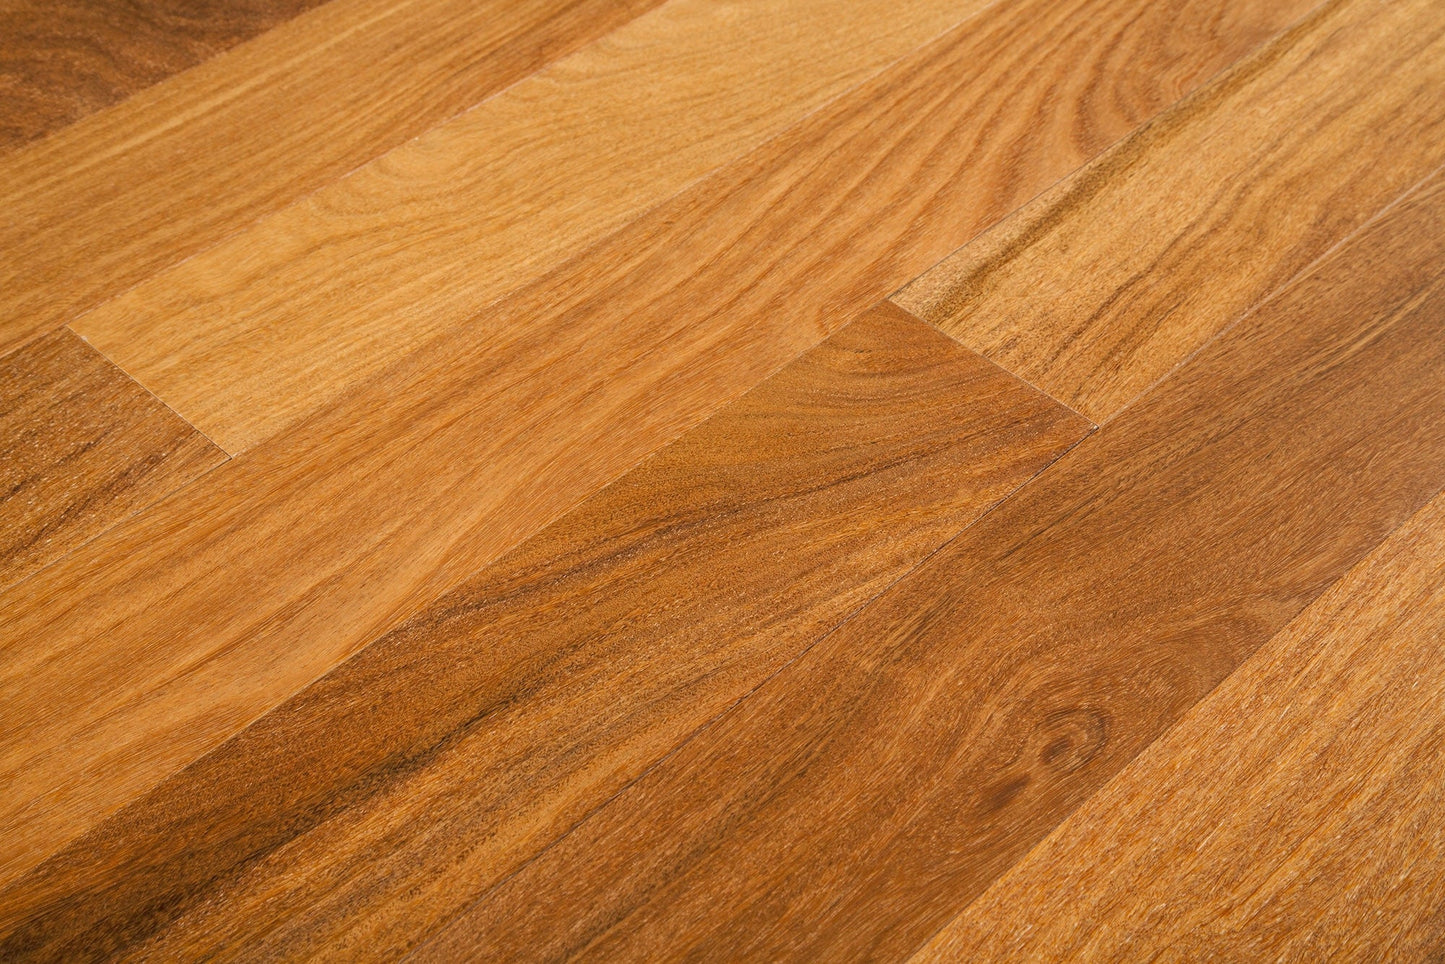 Hardwood - Andes Collection